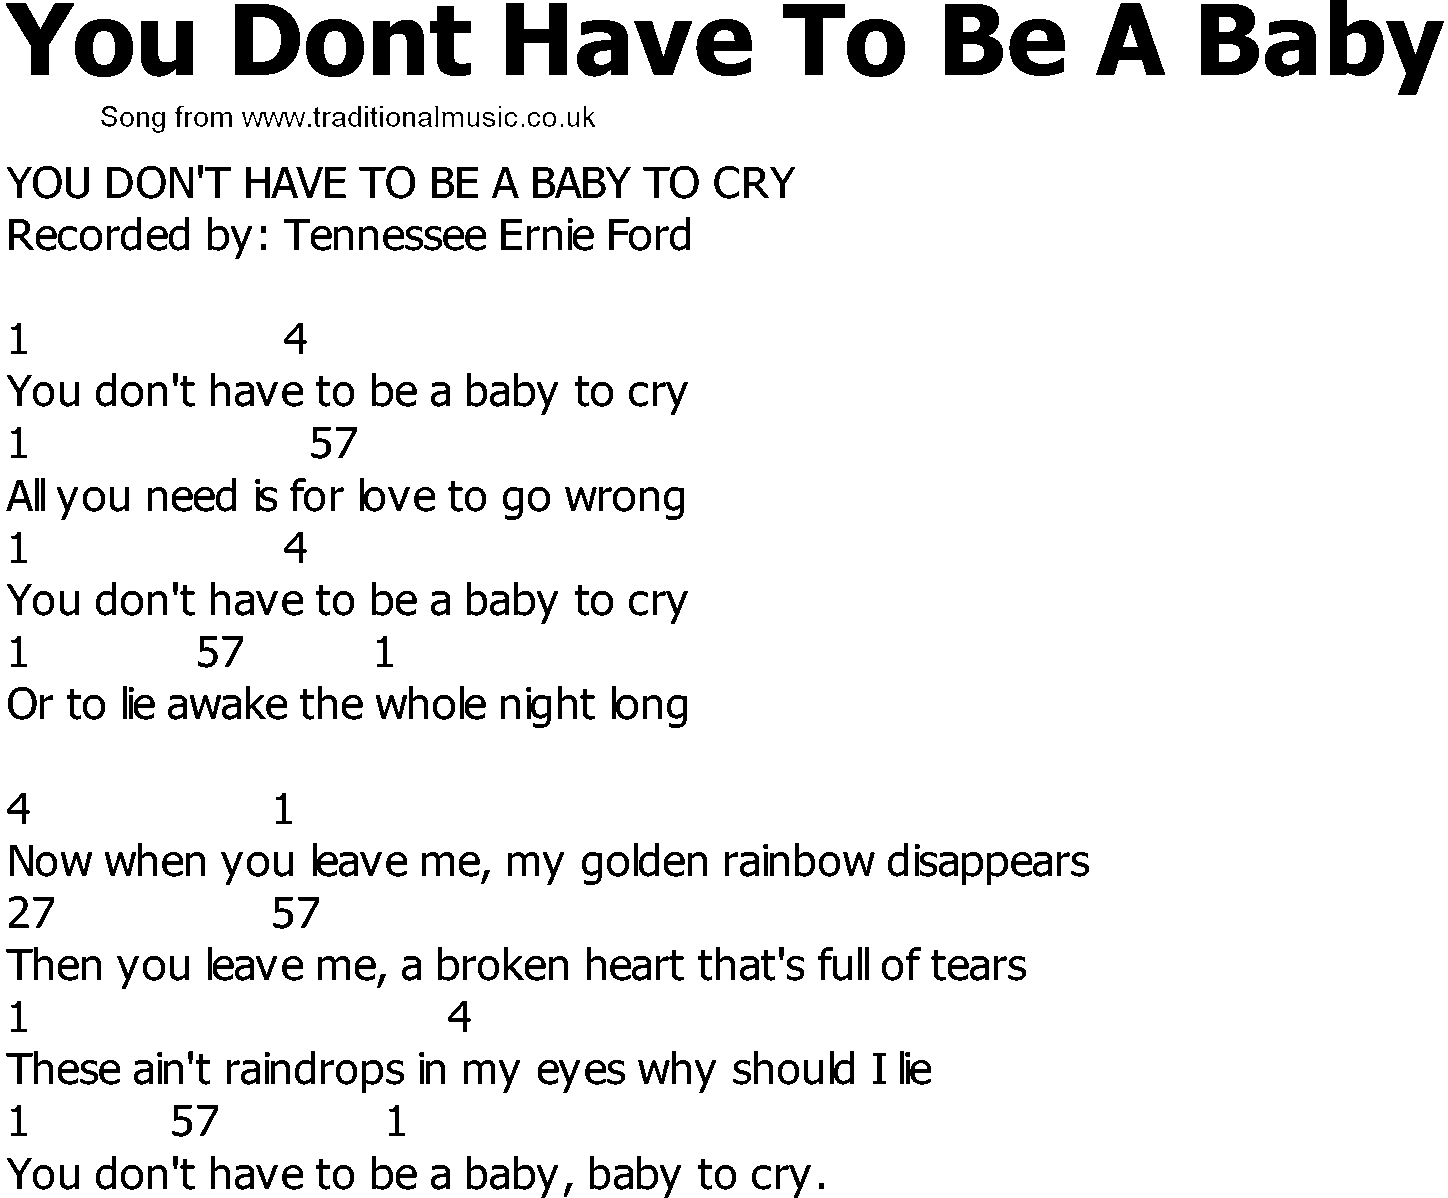 Old Country song lyrics with chords - You Dont Have To Be A Baby